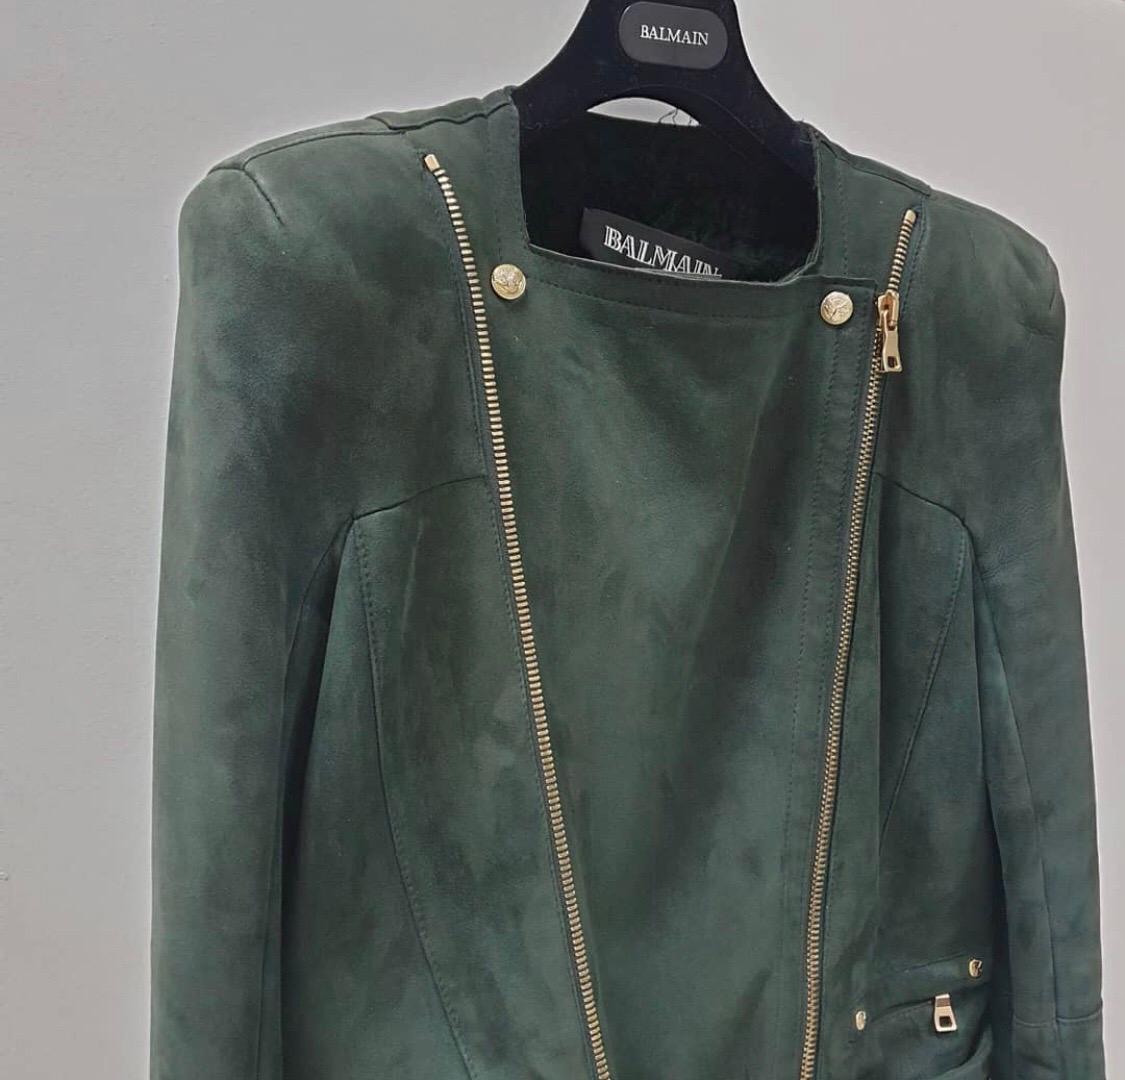 Balmain Women's Green Shearling Biker Style Leather Jacket

Sz38.

Green colour.

Condition is perfect.

Original price $8330

For buyers from EU we can provide shipping from Poland. Please demand if you need.